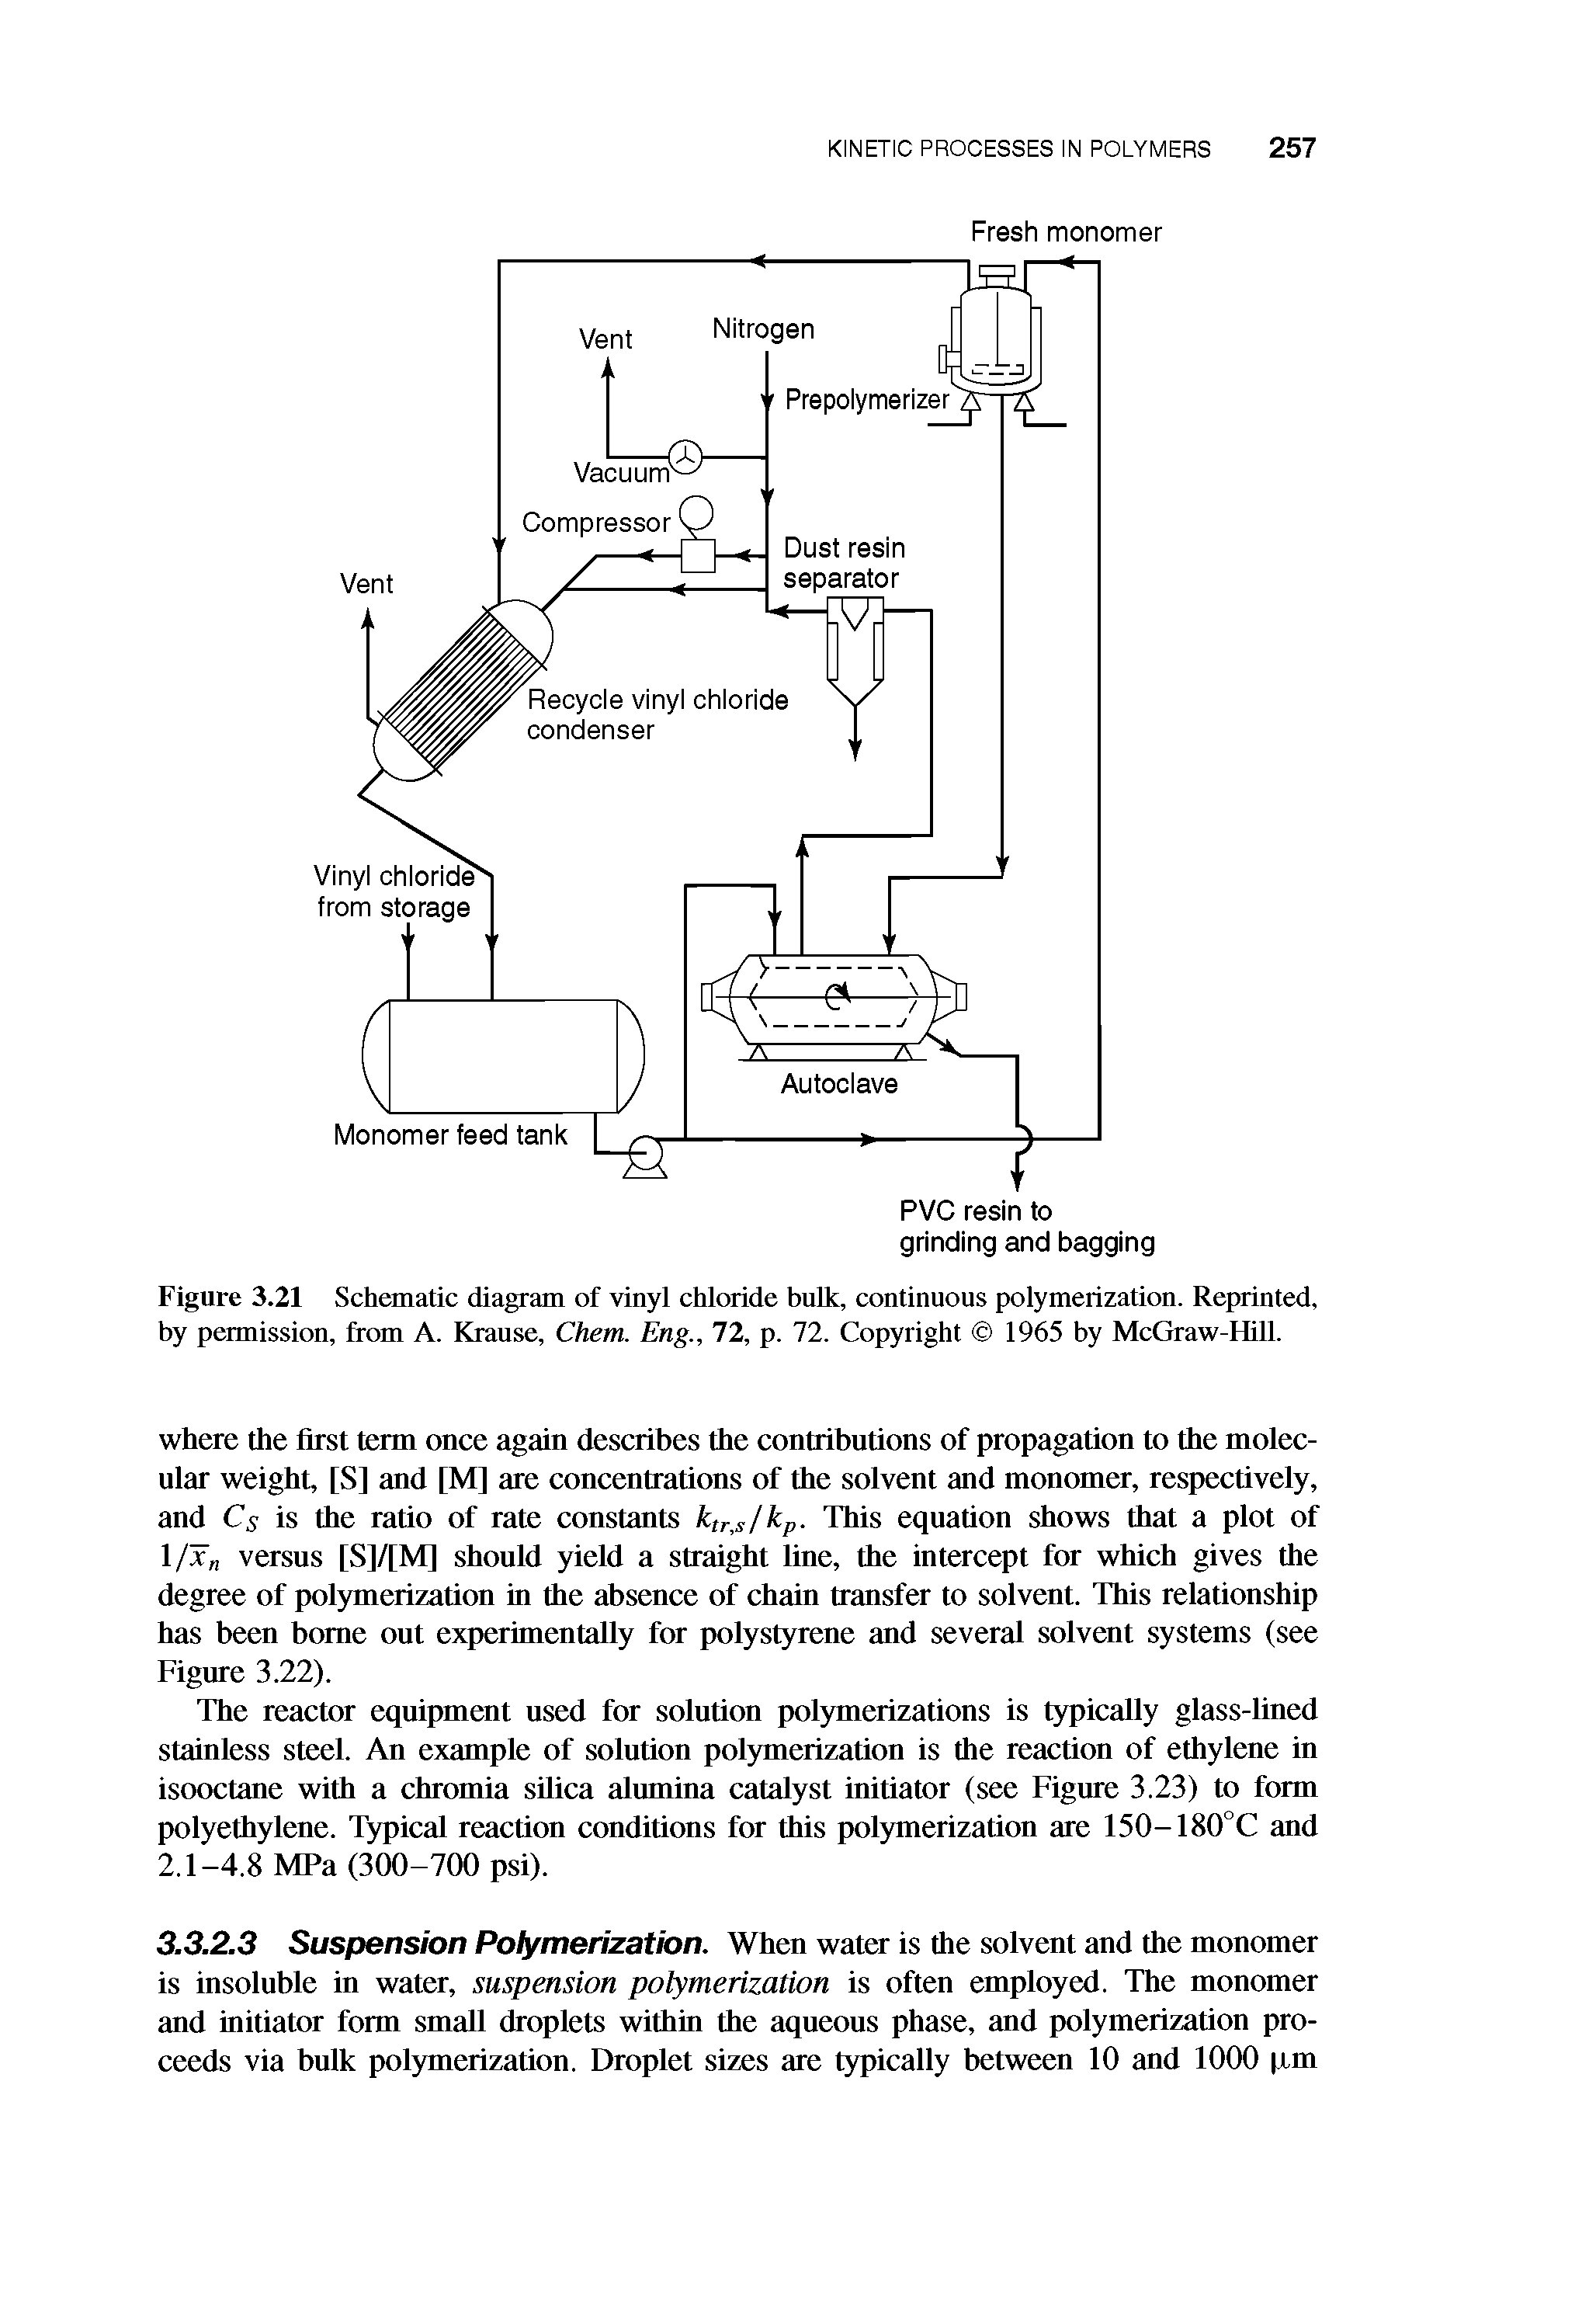 Figure 3.21 Schematic diagram of vinyl chloride bulk, continuous polymerization. Reprinted, by permission, from A. Krause, Chem. Eng., 72, p. 72. Copyright 1965 by McGraw-Hill.